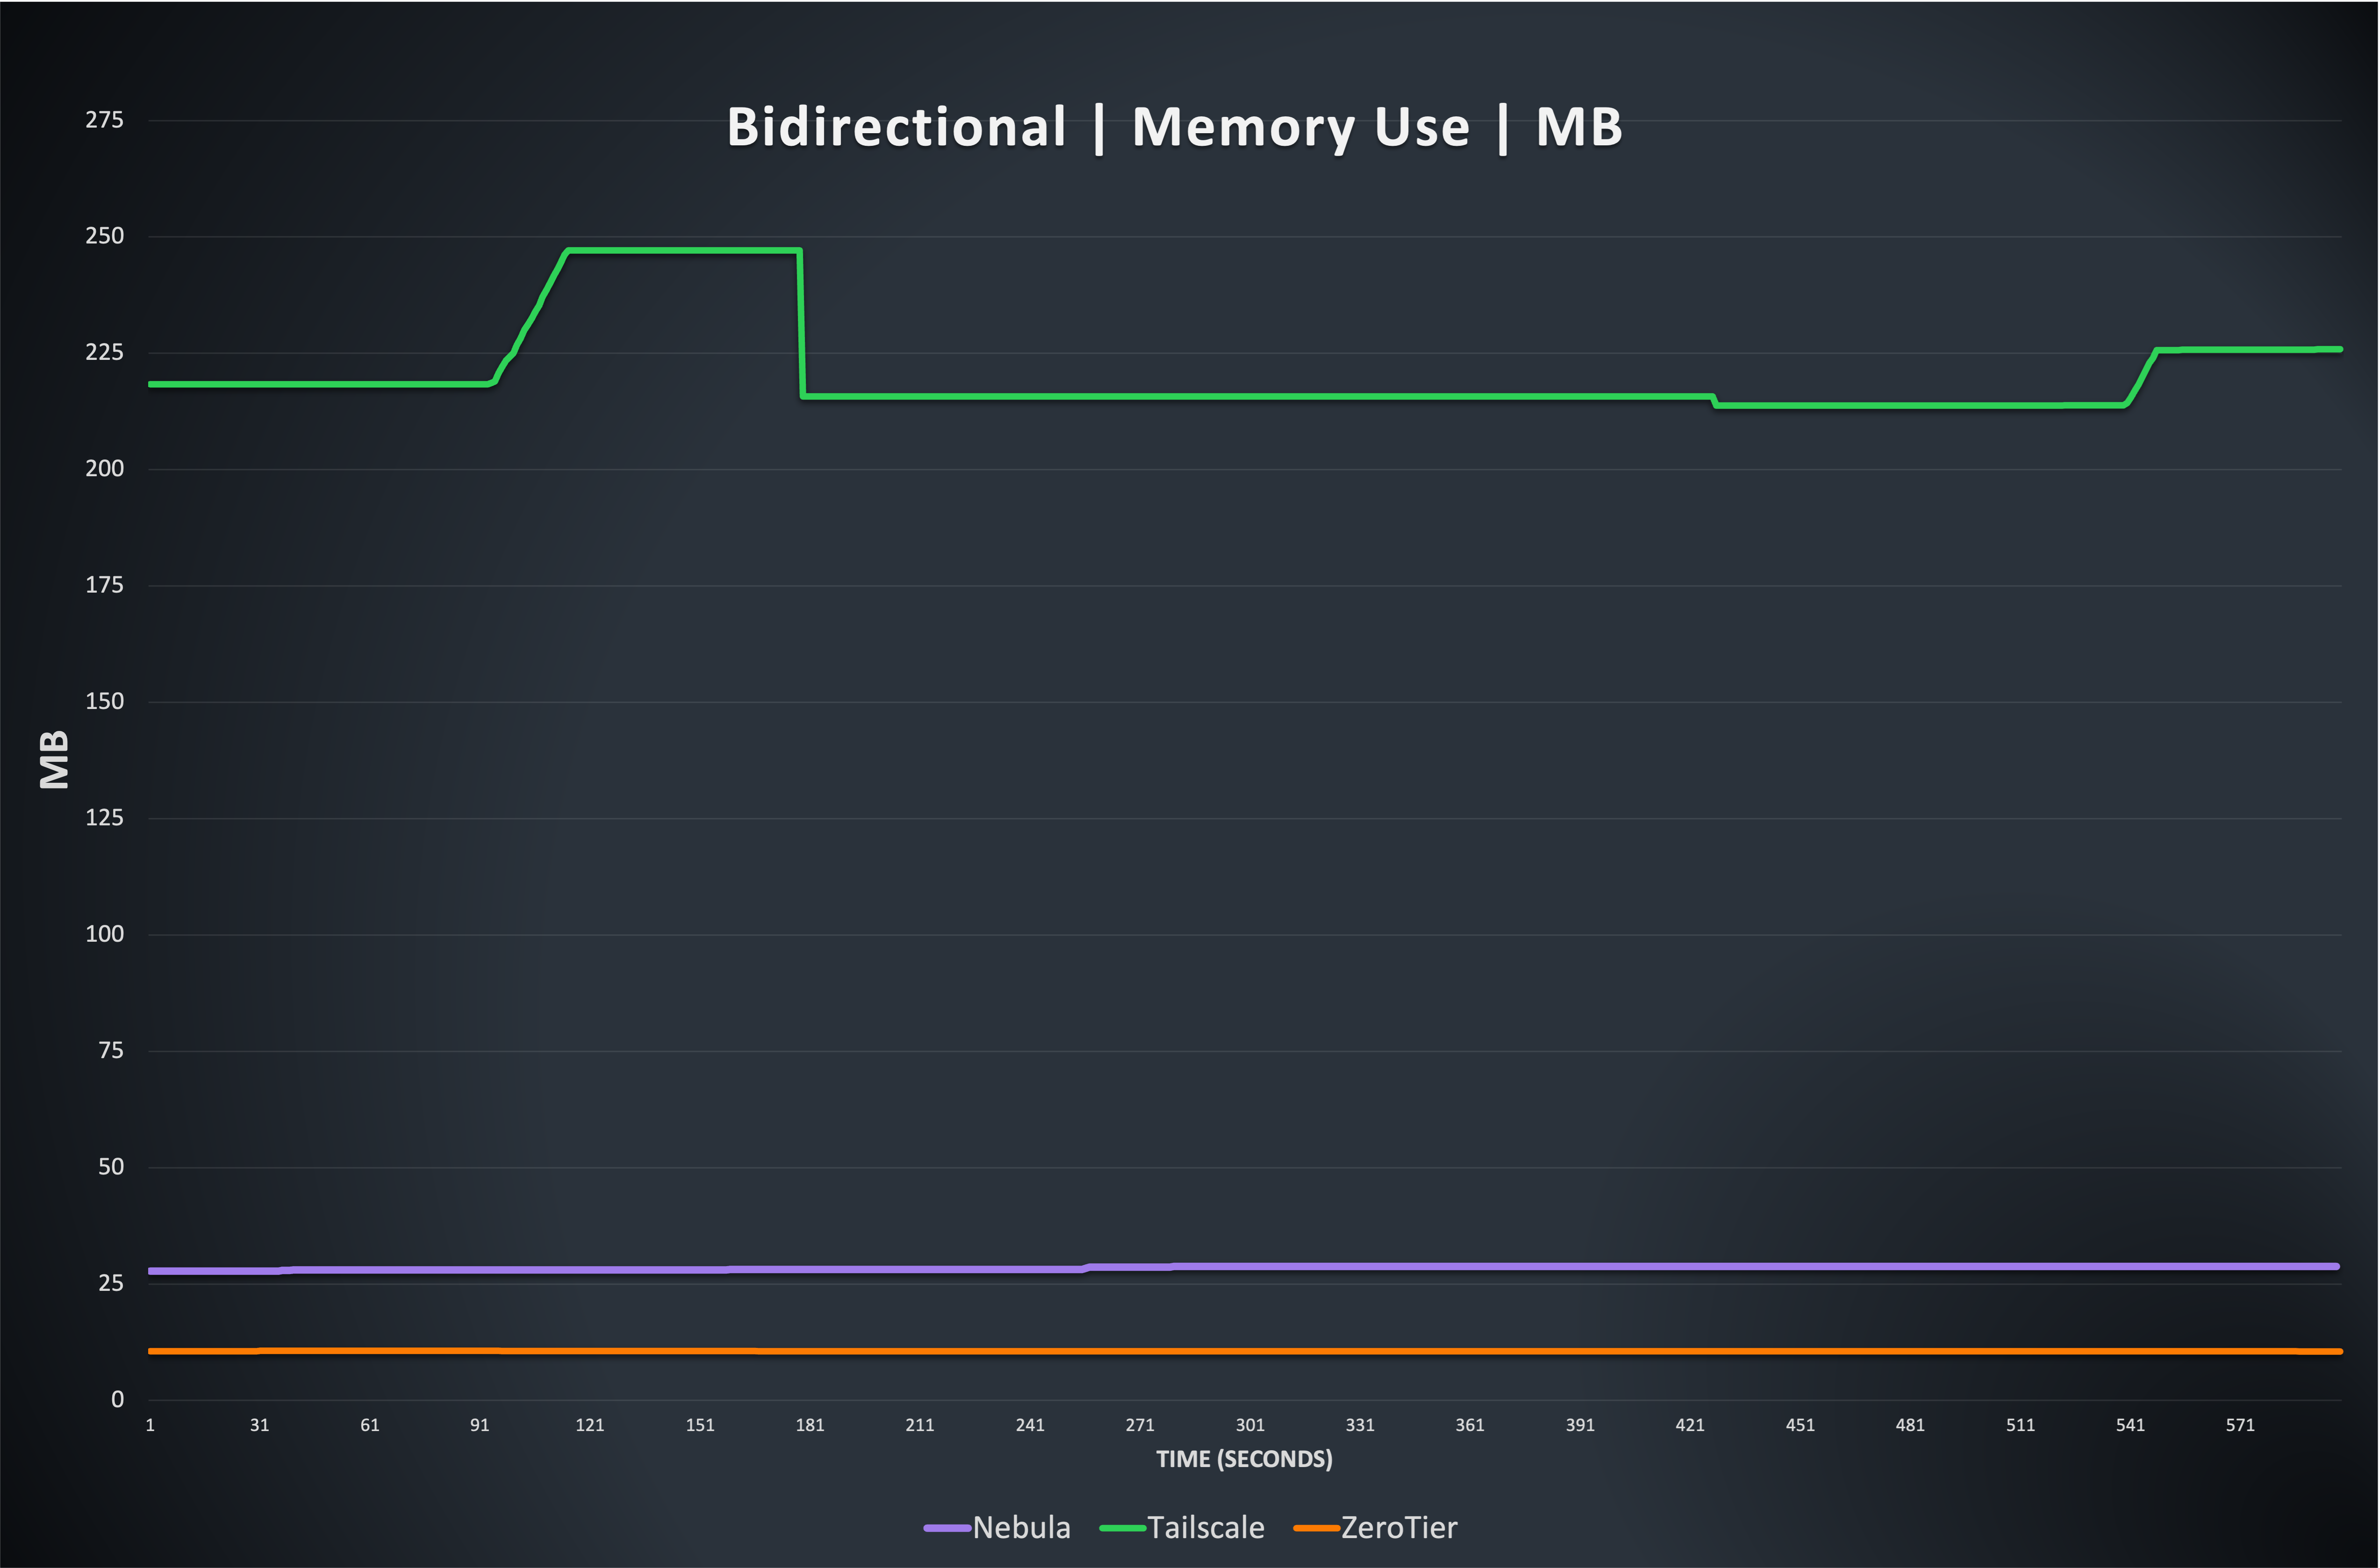 Line graph showing bidirectional memory usage of Nebula, Tailscale, and ZeroTier. ZeroTier uses about 10 MB, Nebula 27 Mb , and Tailscale ranges between 220 MB and 250MB.